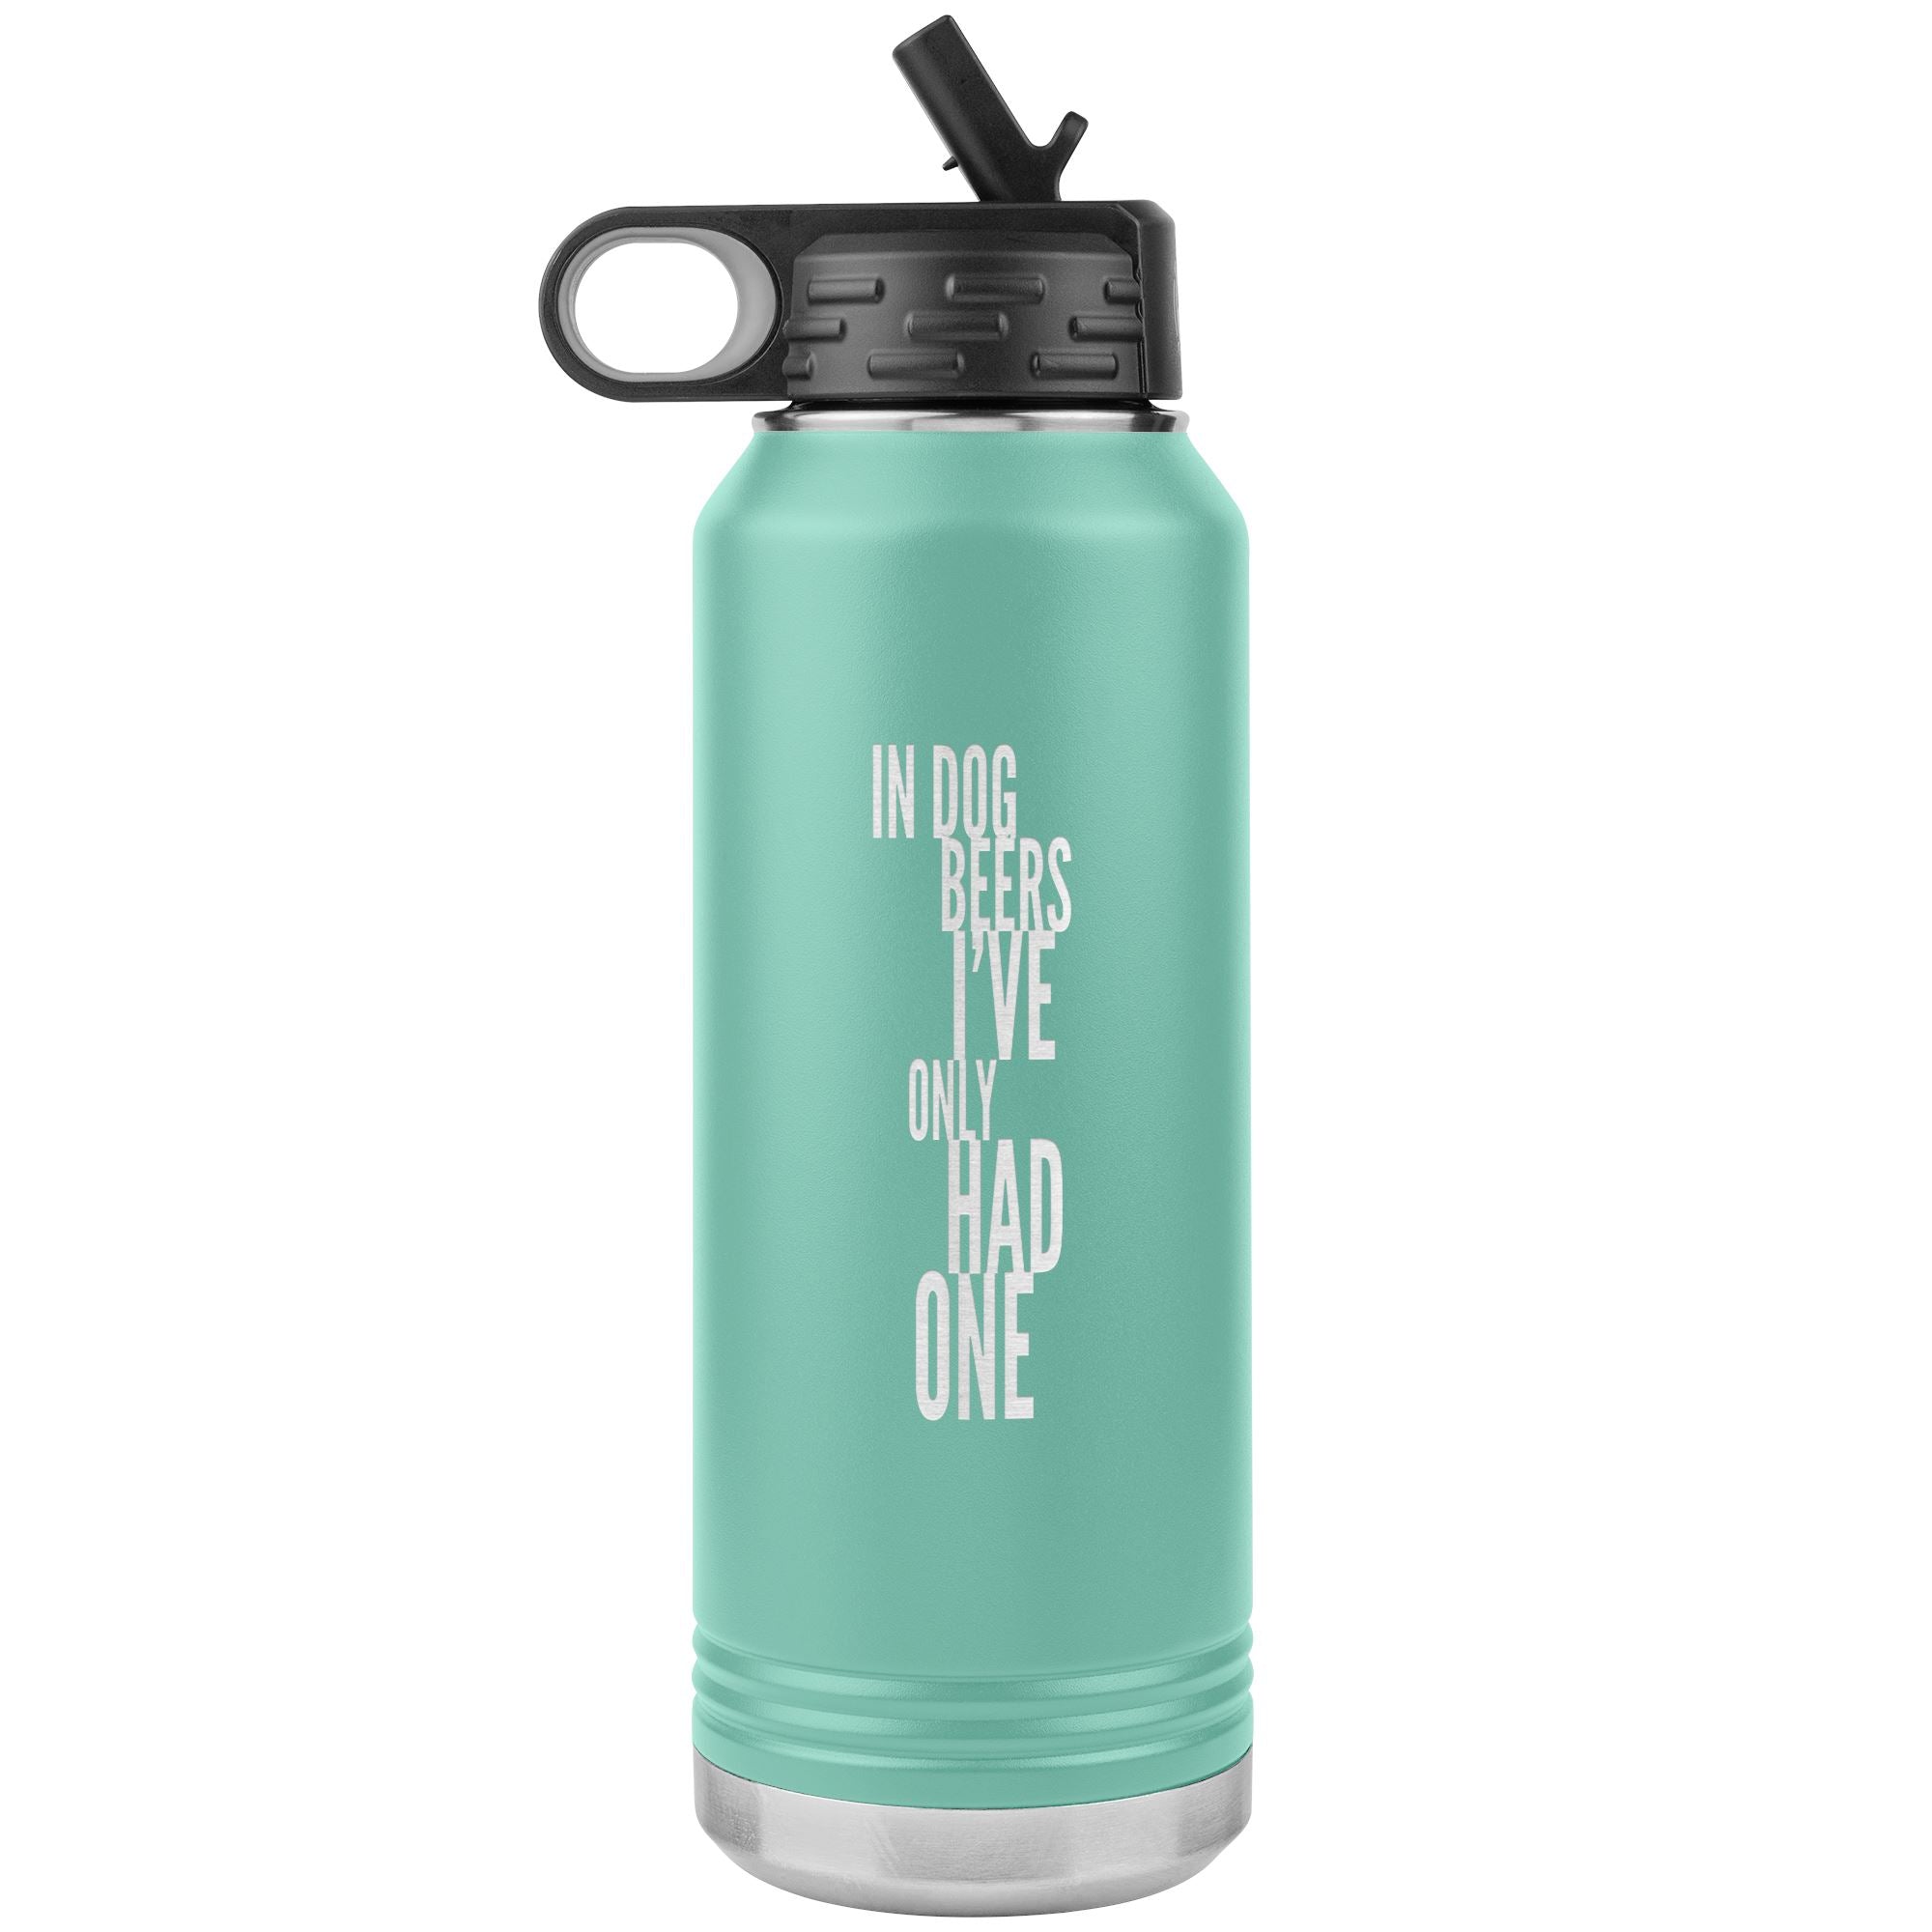 In Dog Beers I've Only Had One 32oz Tumbler Tumblers Teal 